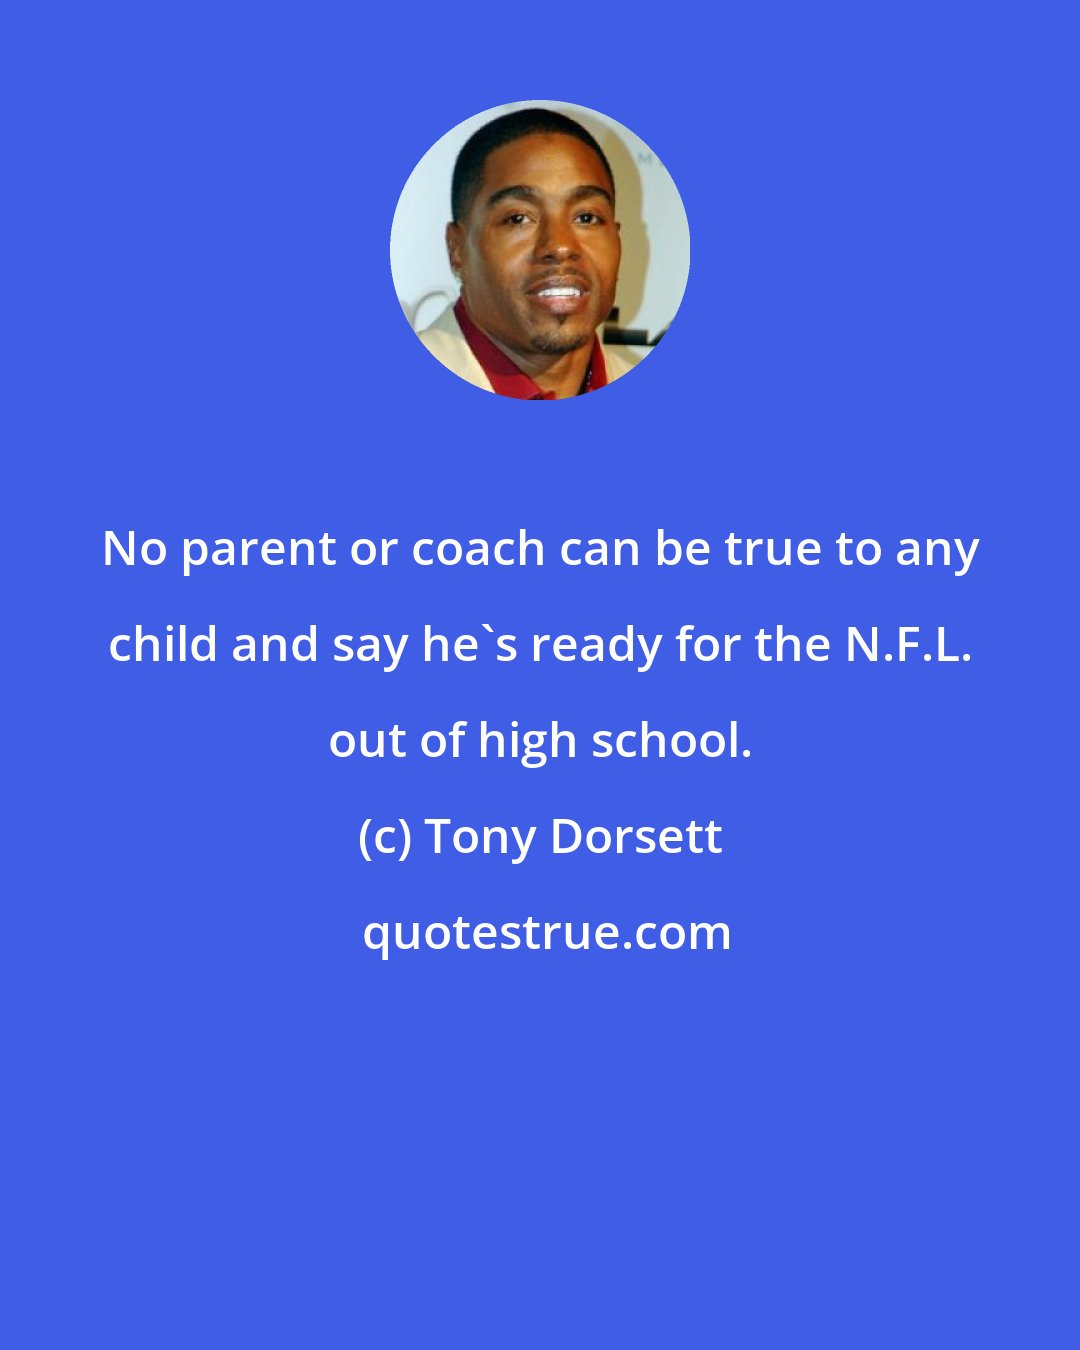 Tony Dorsett: No parent or coach can be true to any child and say he's ready for the N.F.L. out of high school.